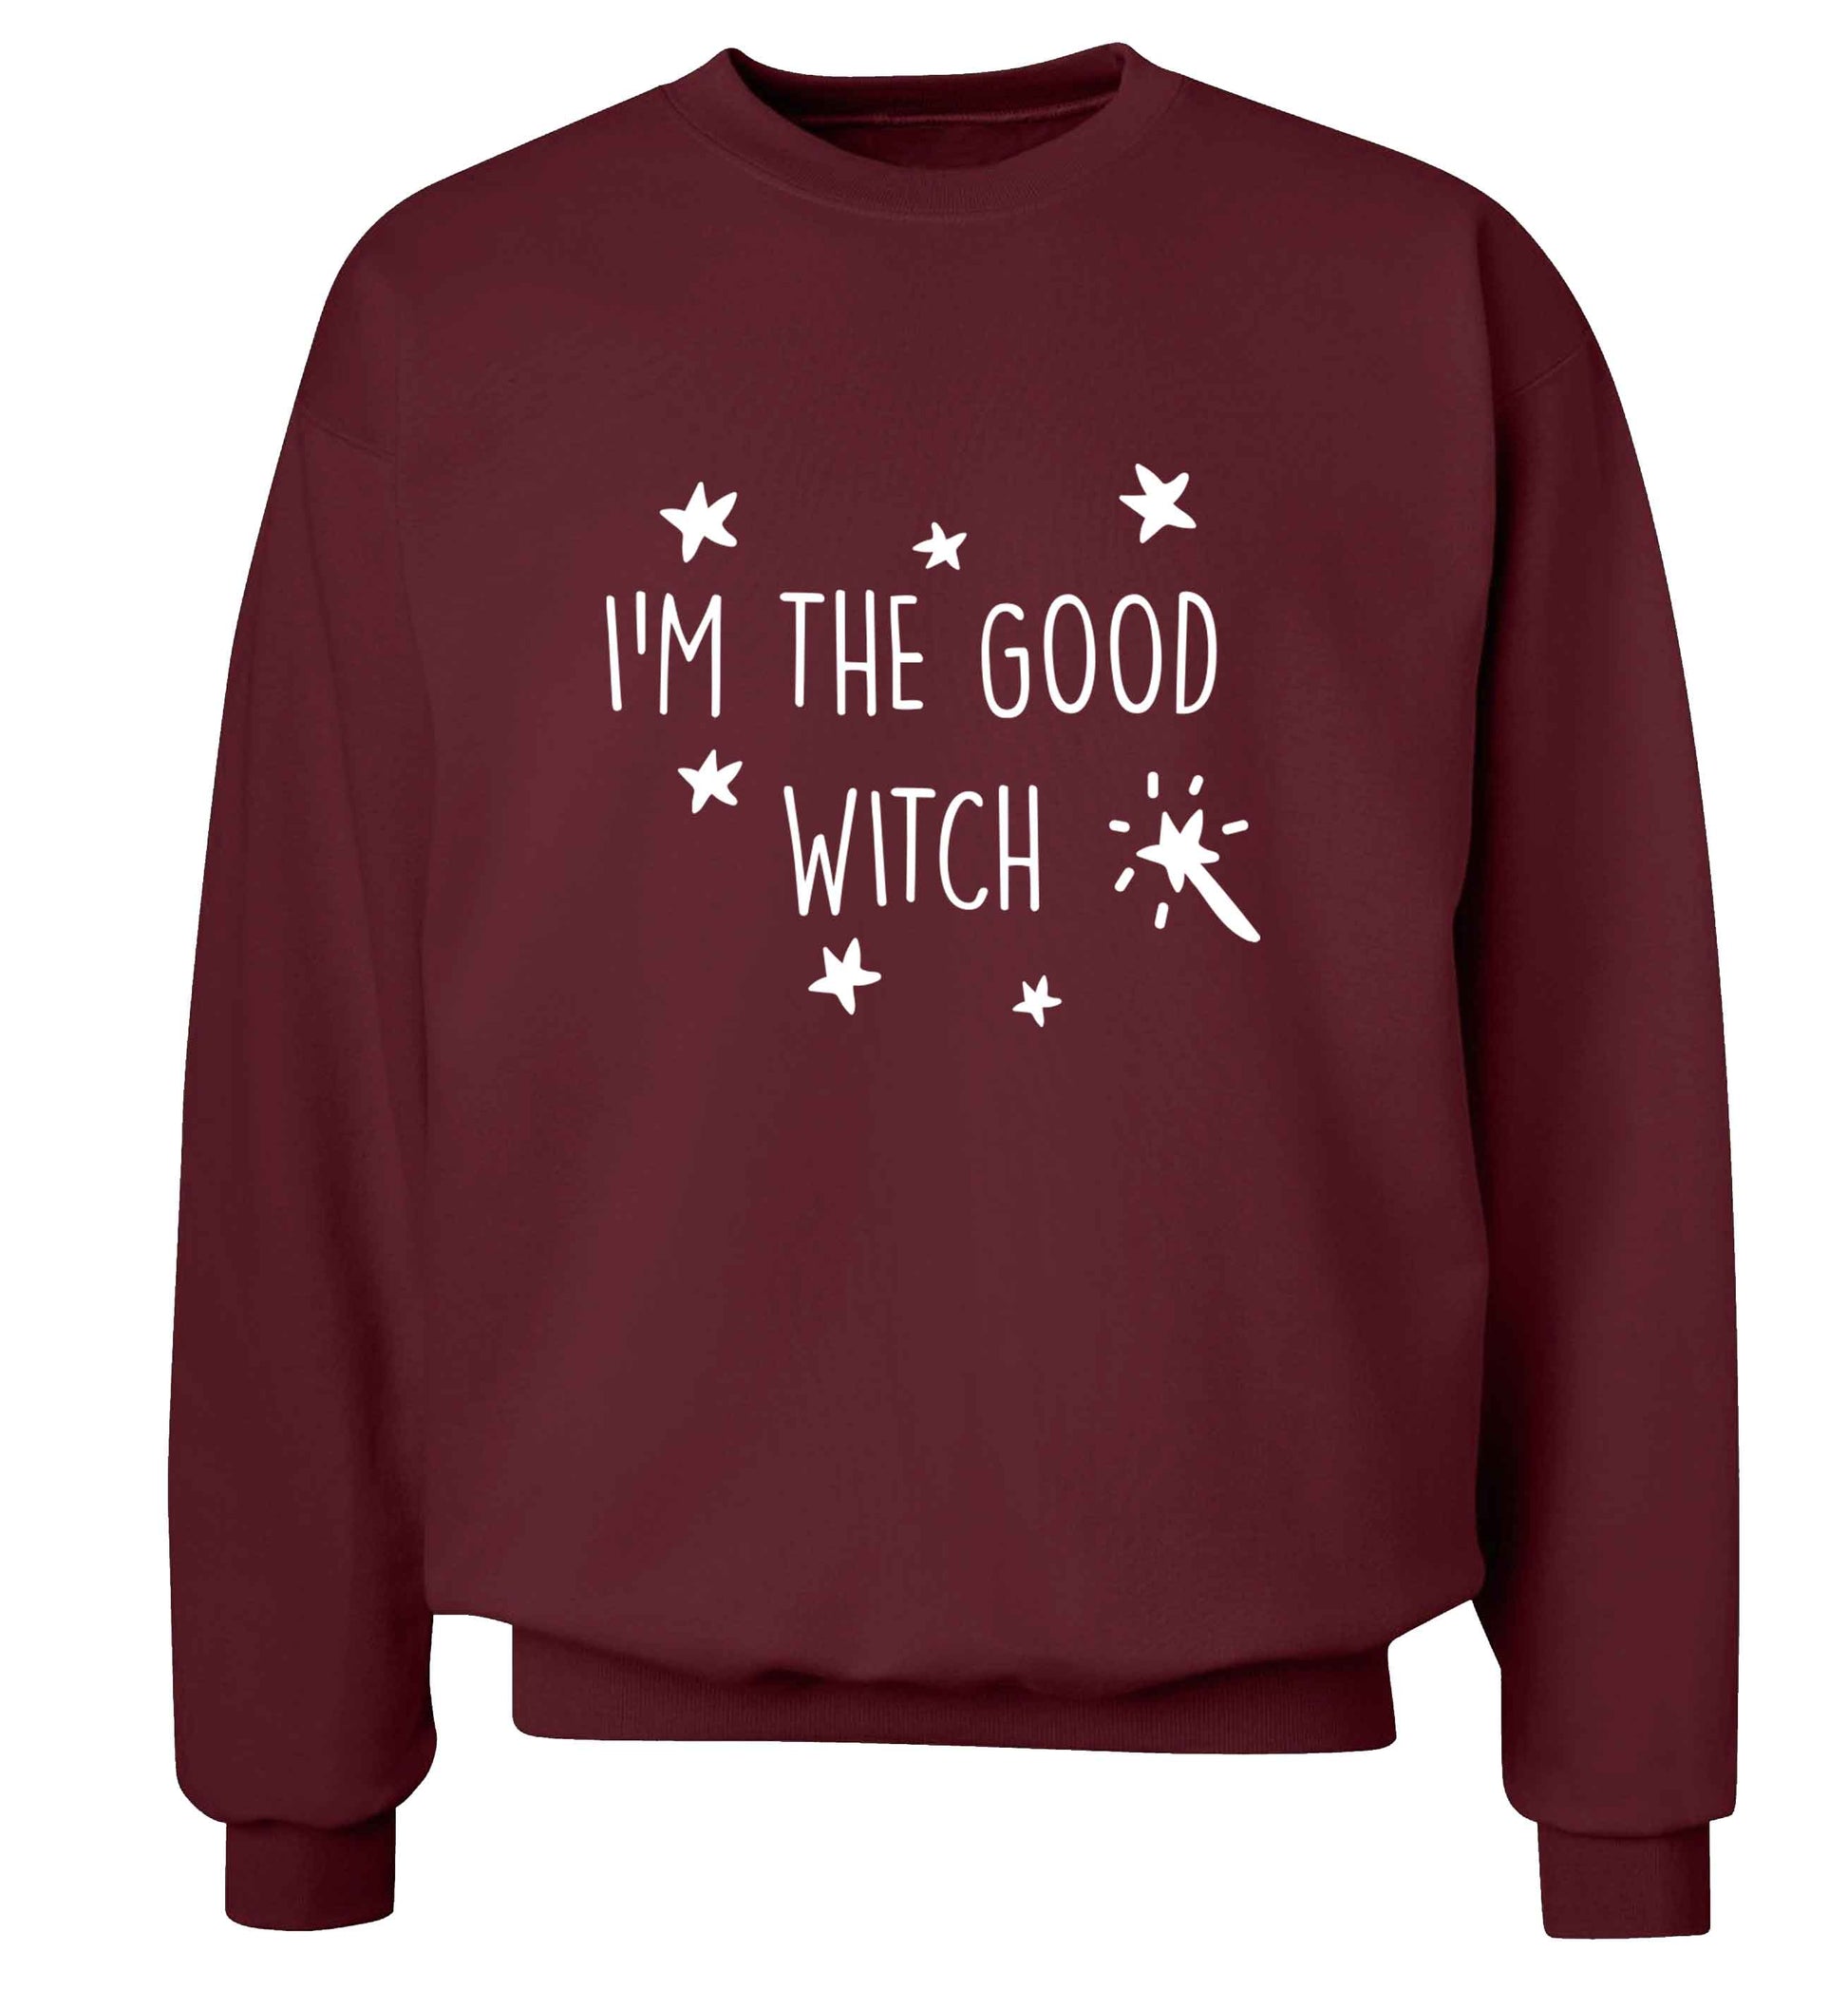 Good witch adult's unisex maroon sweater 2XL